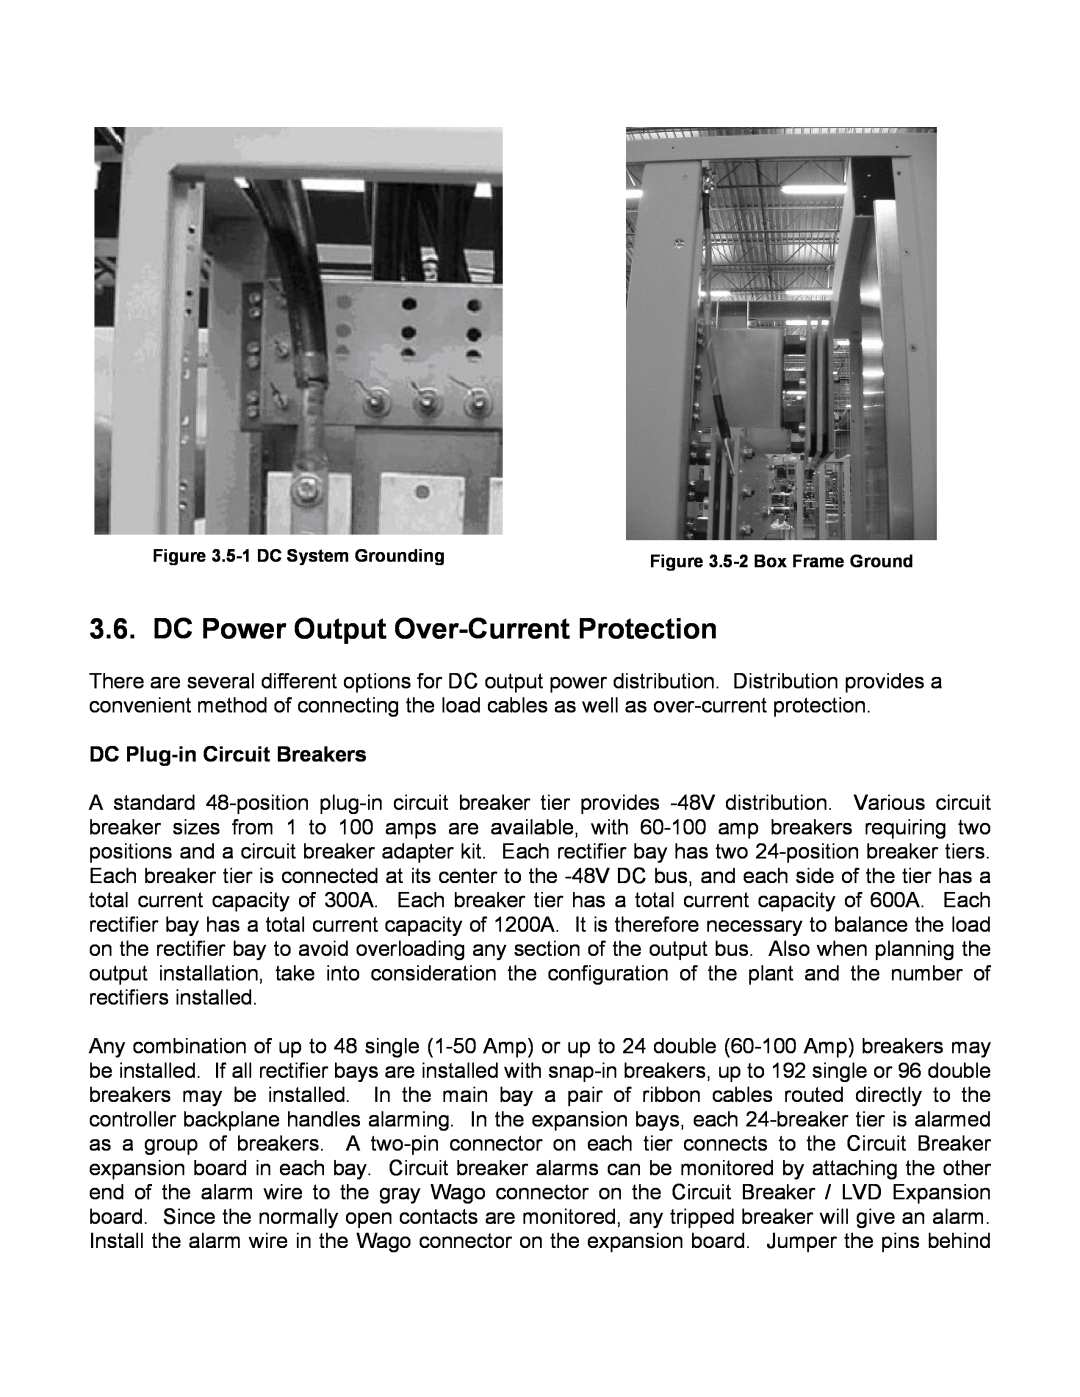 American Power Conversion MX28B2400, MX28B4800 manual DC Power Output Over-Current Protection, DC Plug-in Circuit Breakers 